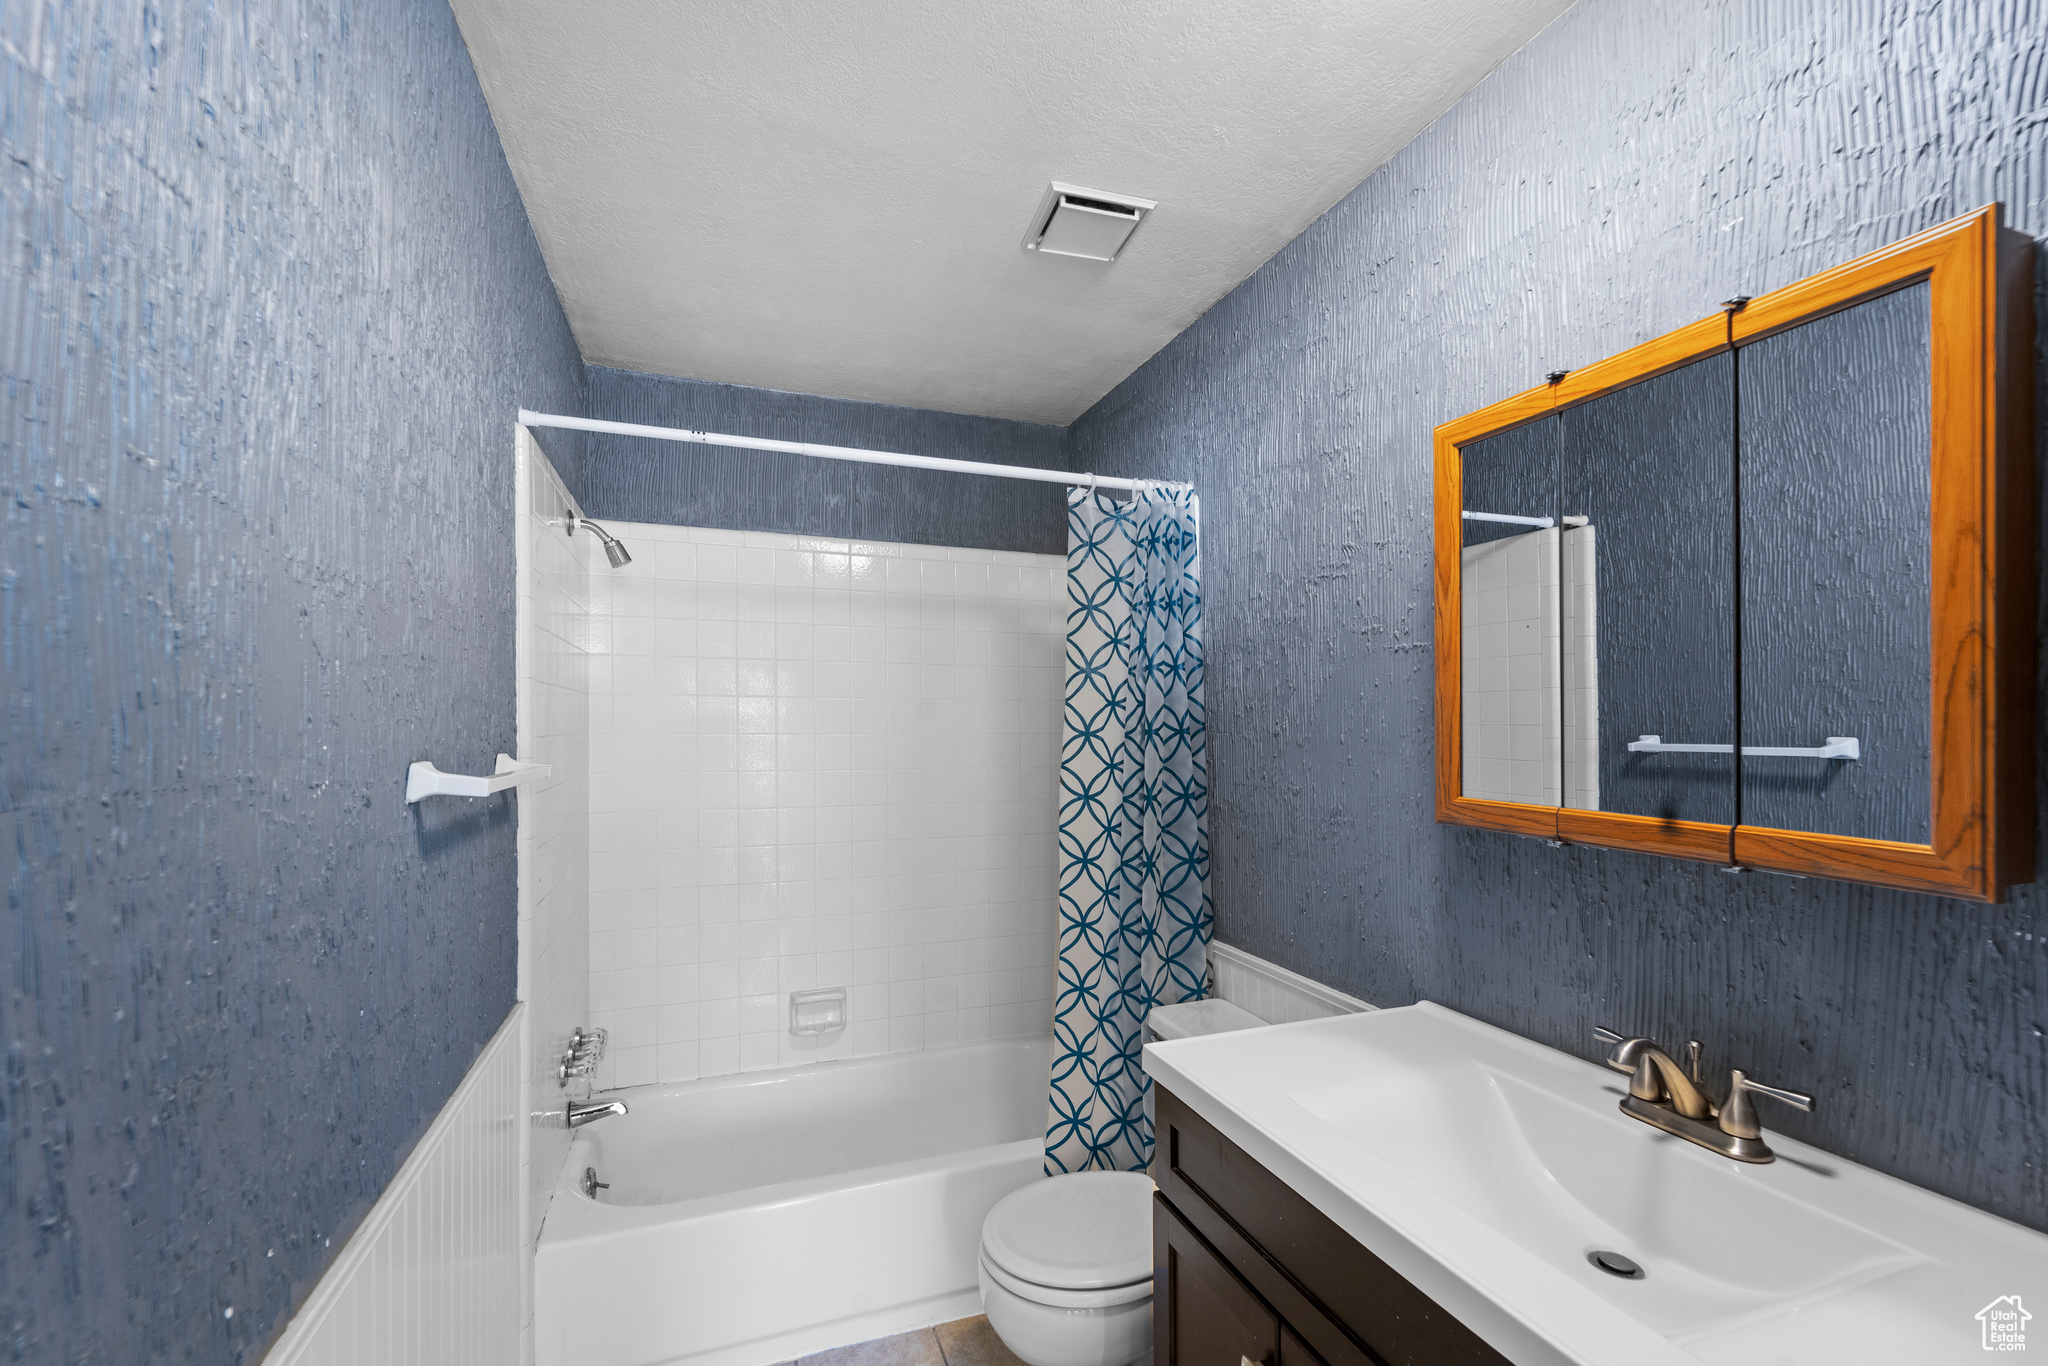 Ensuite bathroom featuring vanity with extensive cabinet space, shower/tub combo, a textured ceiling, and toilet